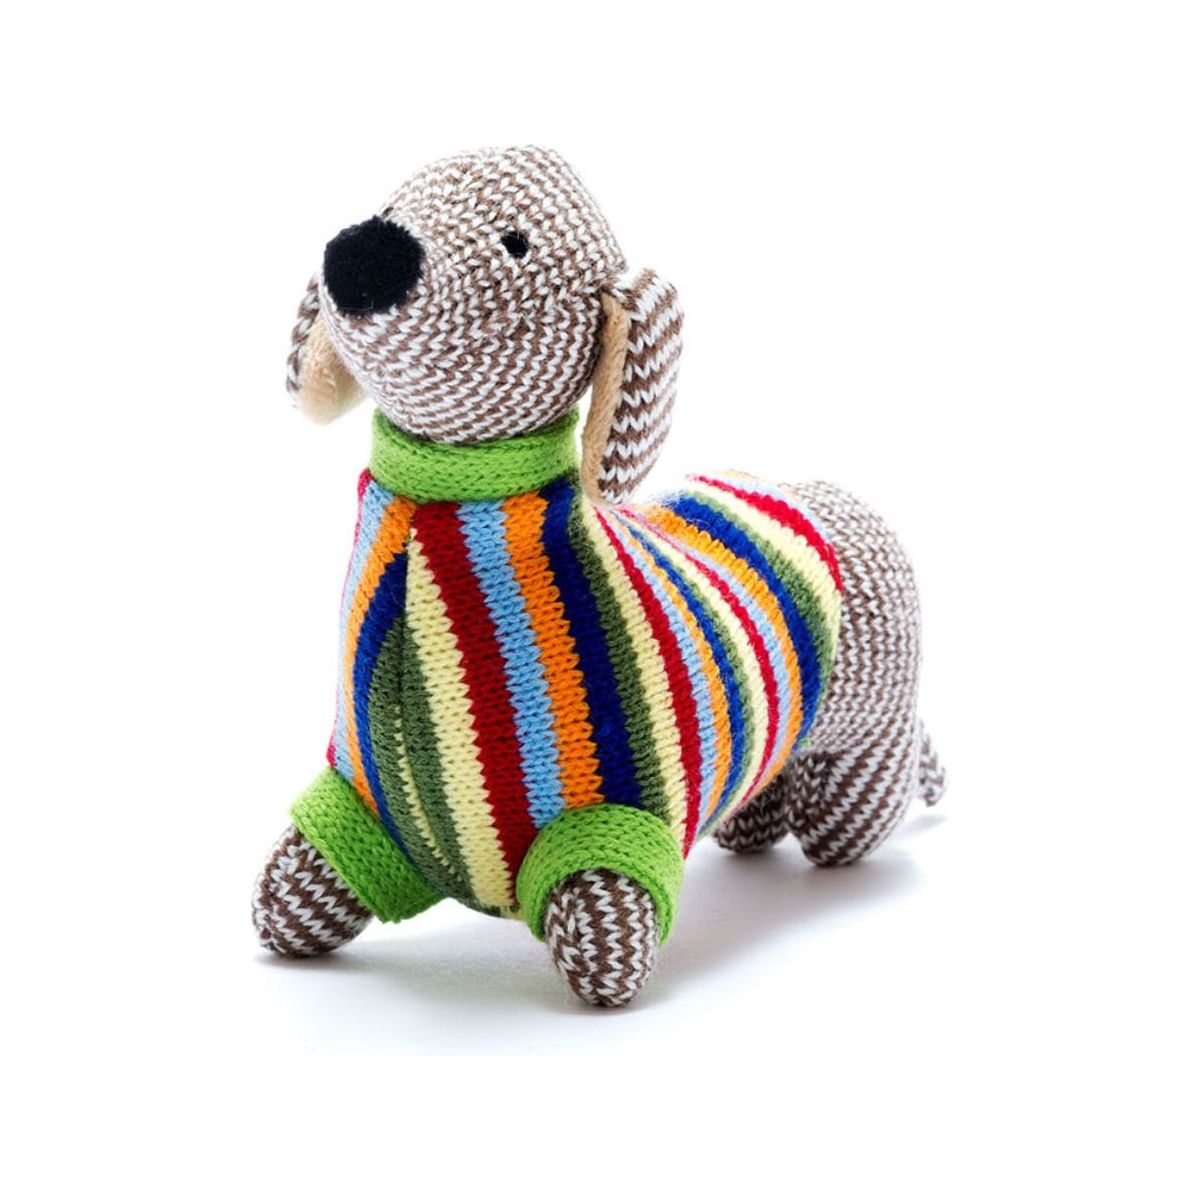 Best Years Ltd Small Knitted Sausage Dog Toy